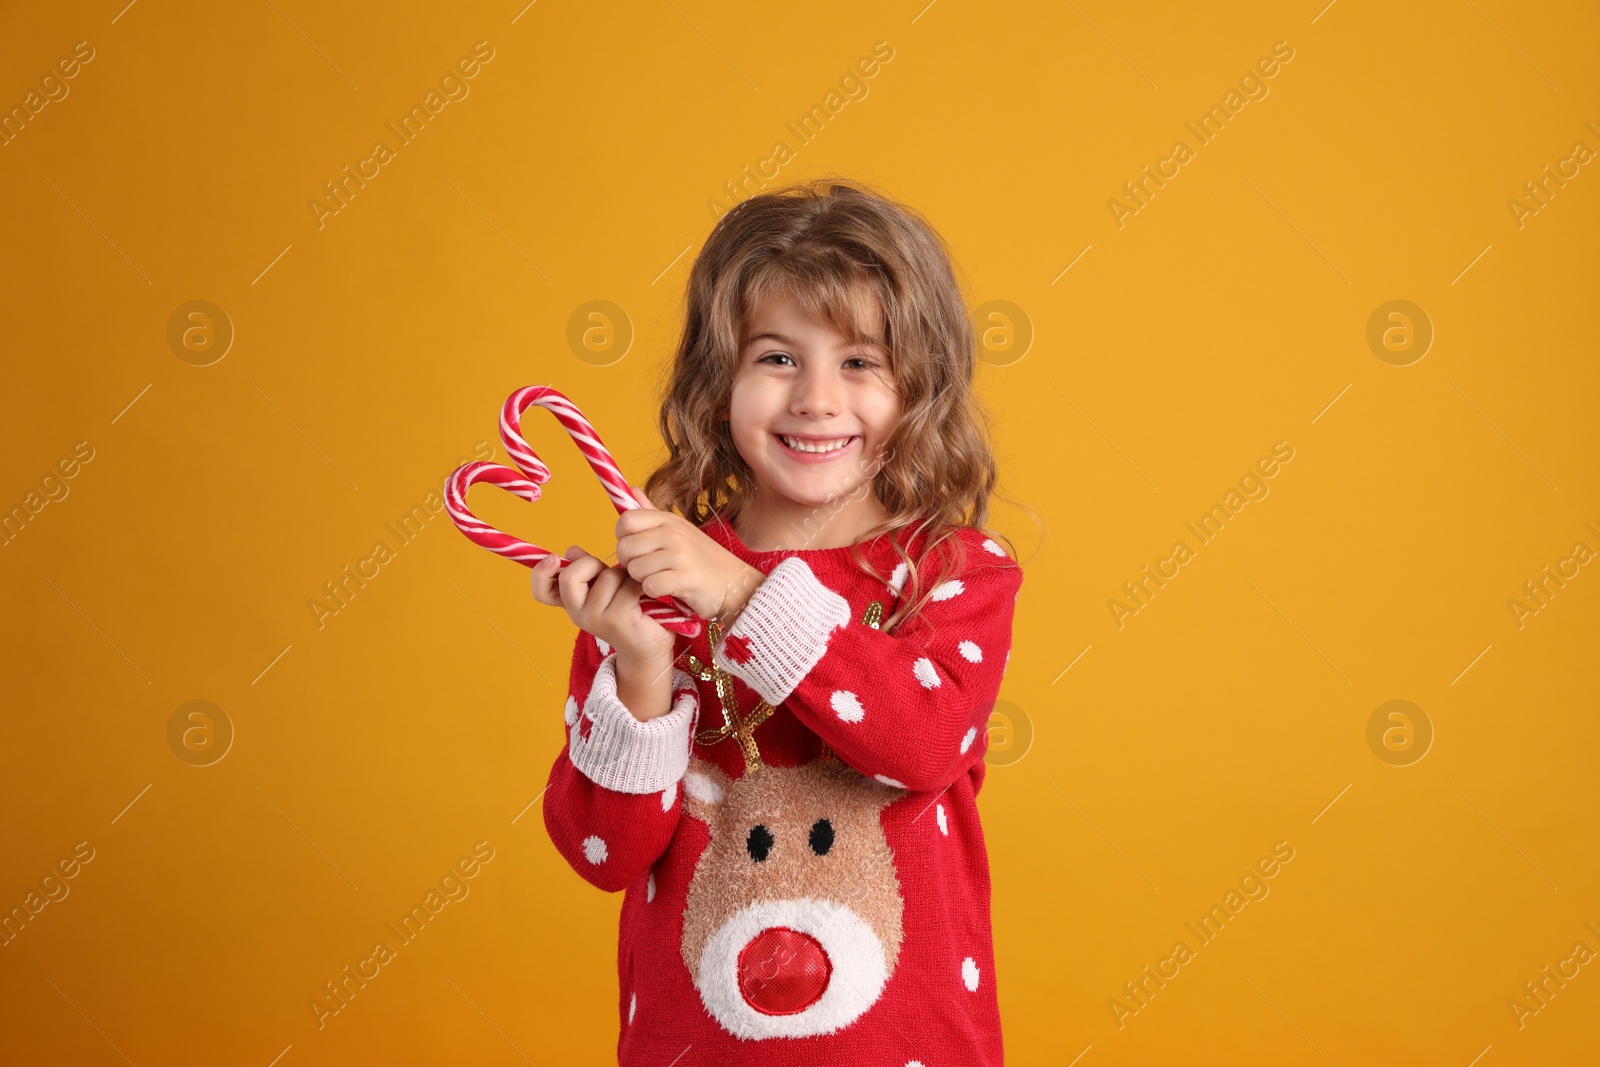 Photo of Cute little girl in Christmas sweater making heart shape with candy canes against orange background